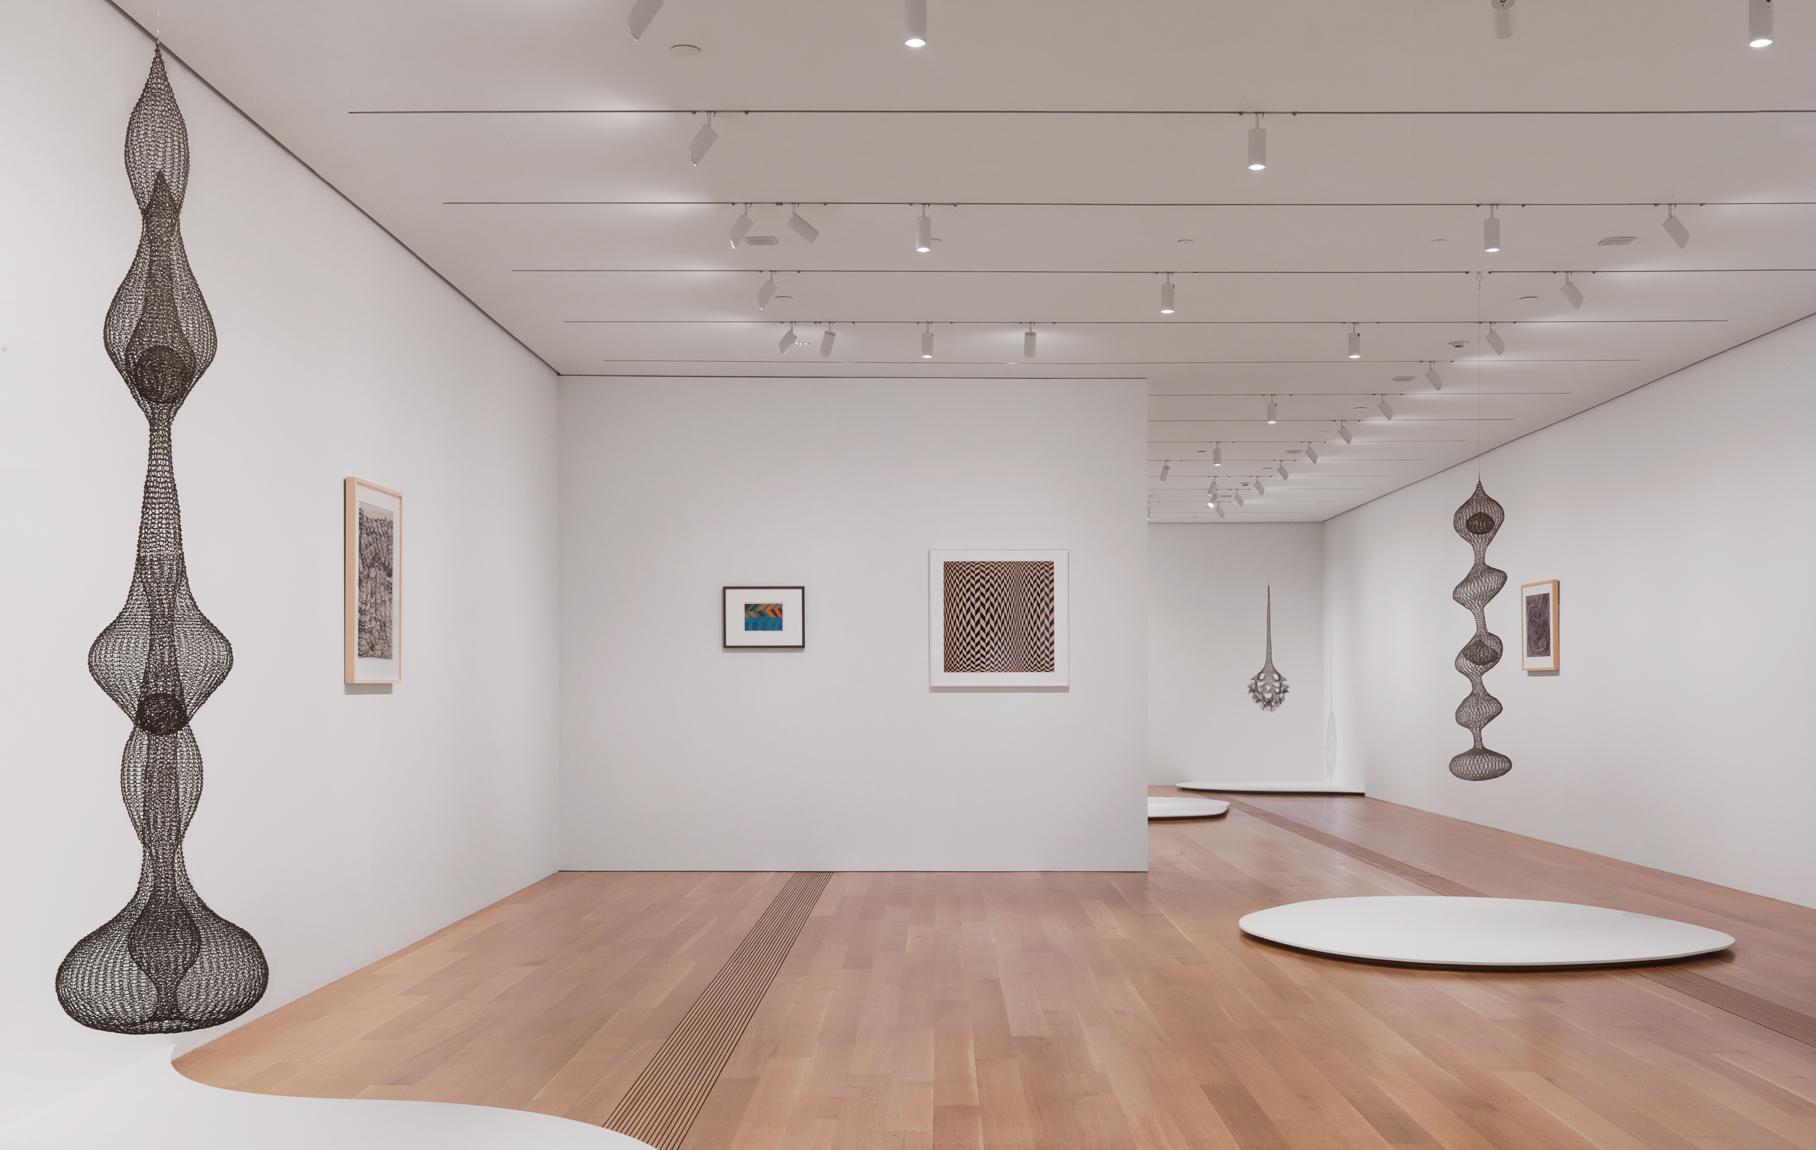 A view of work by Ruth Asawa in the Lower East Gallery.